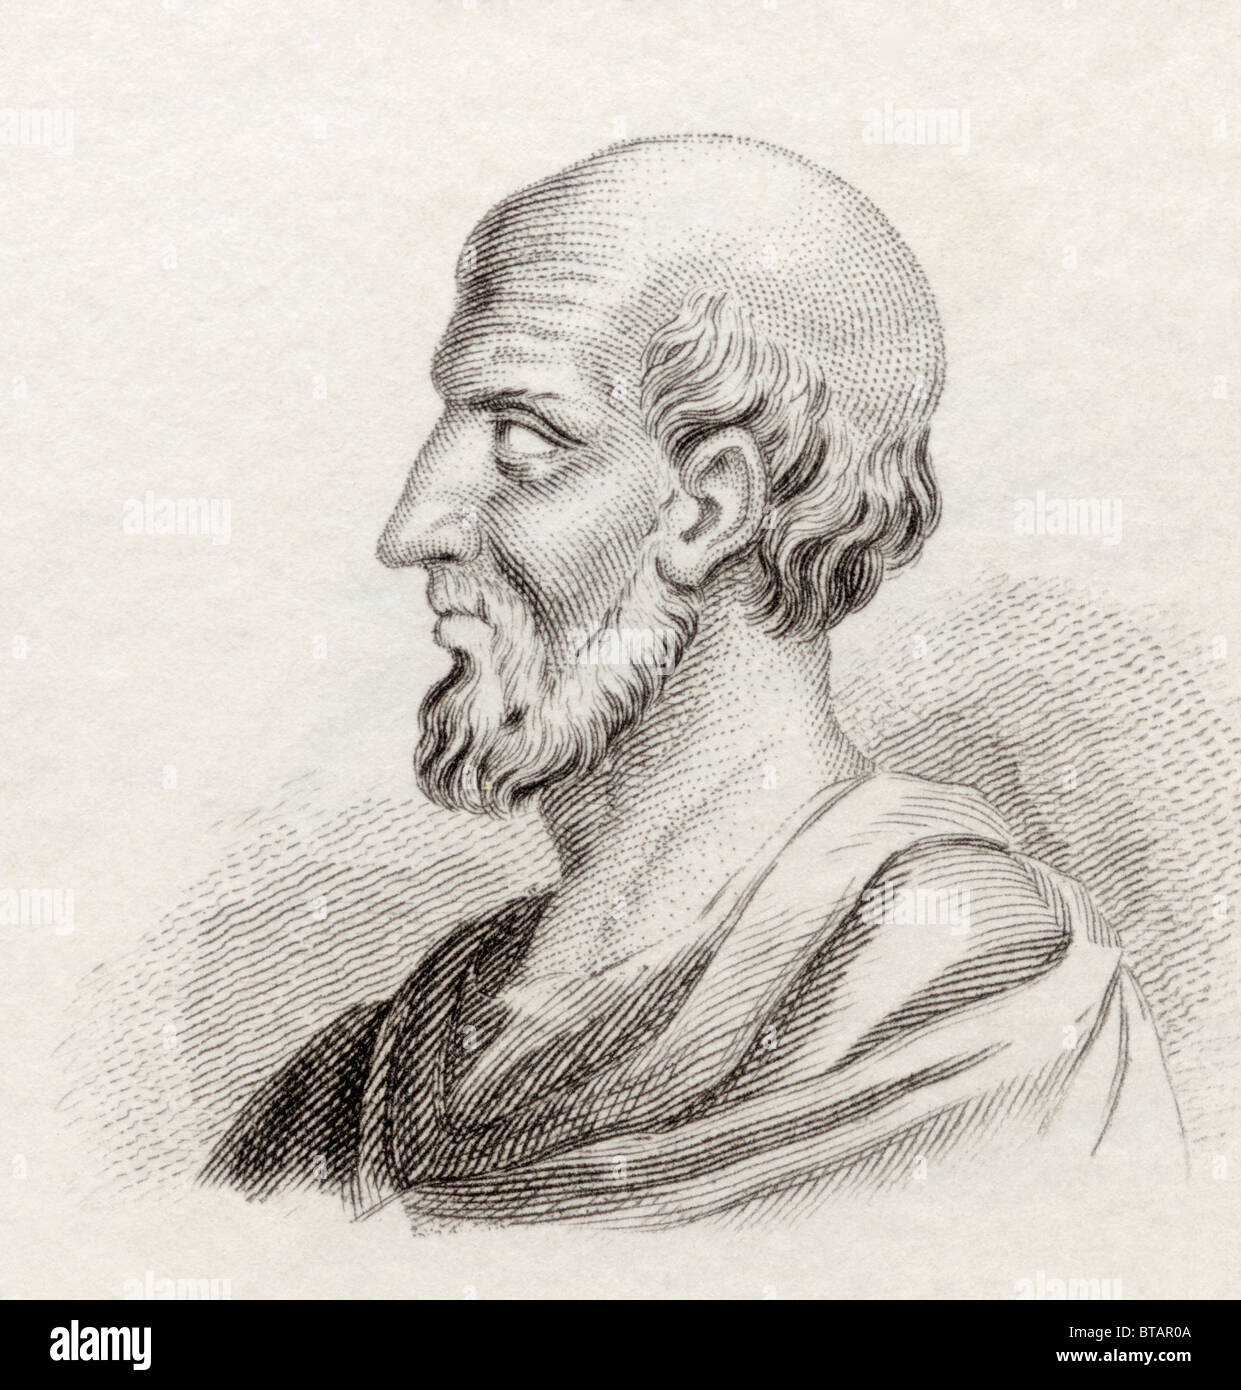 Hippocrates of Cos or Hippokrates of Kos, c. 460 BC to c. 370 BC. Ancient Greek physician of the Age of Pericles. Stock Photo